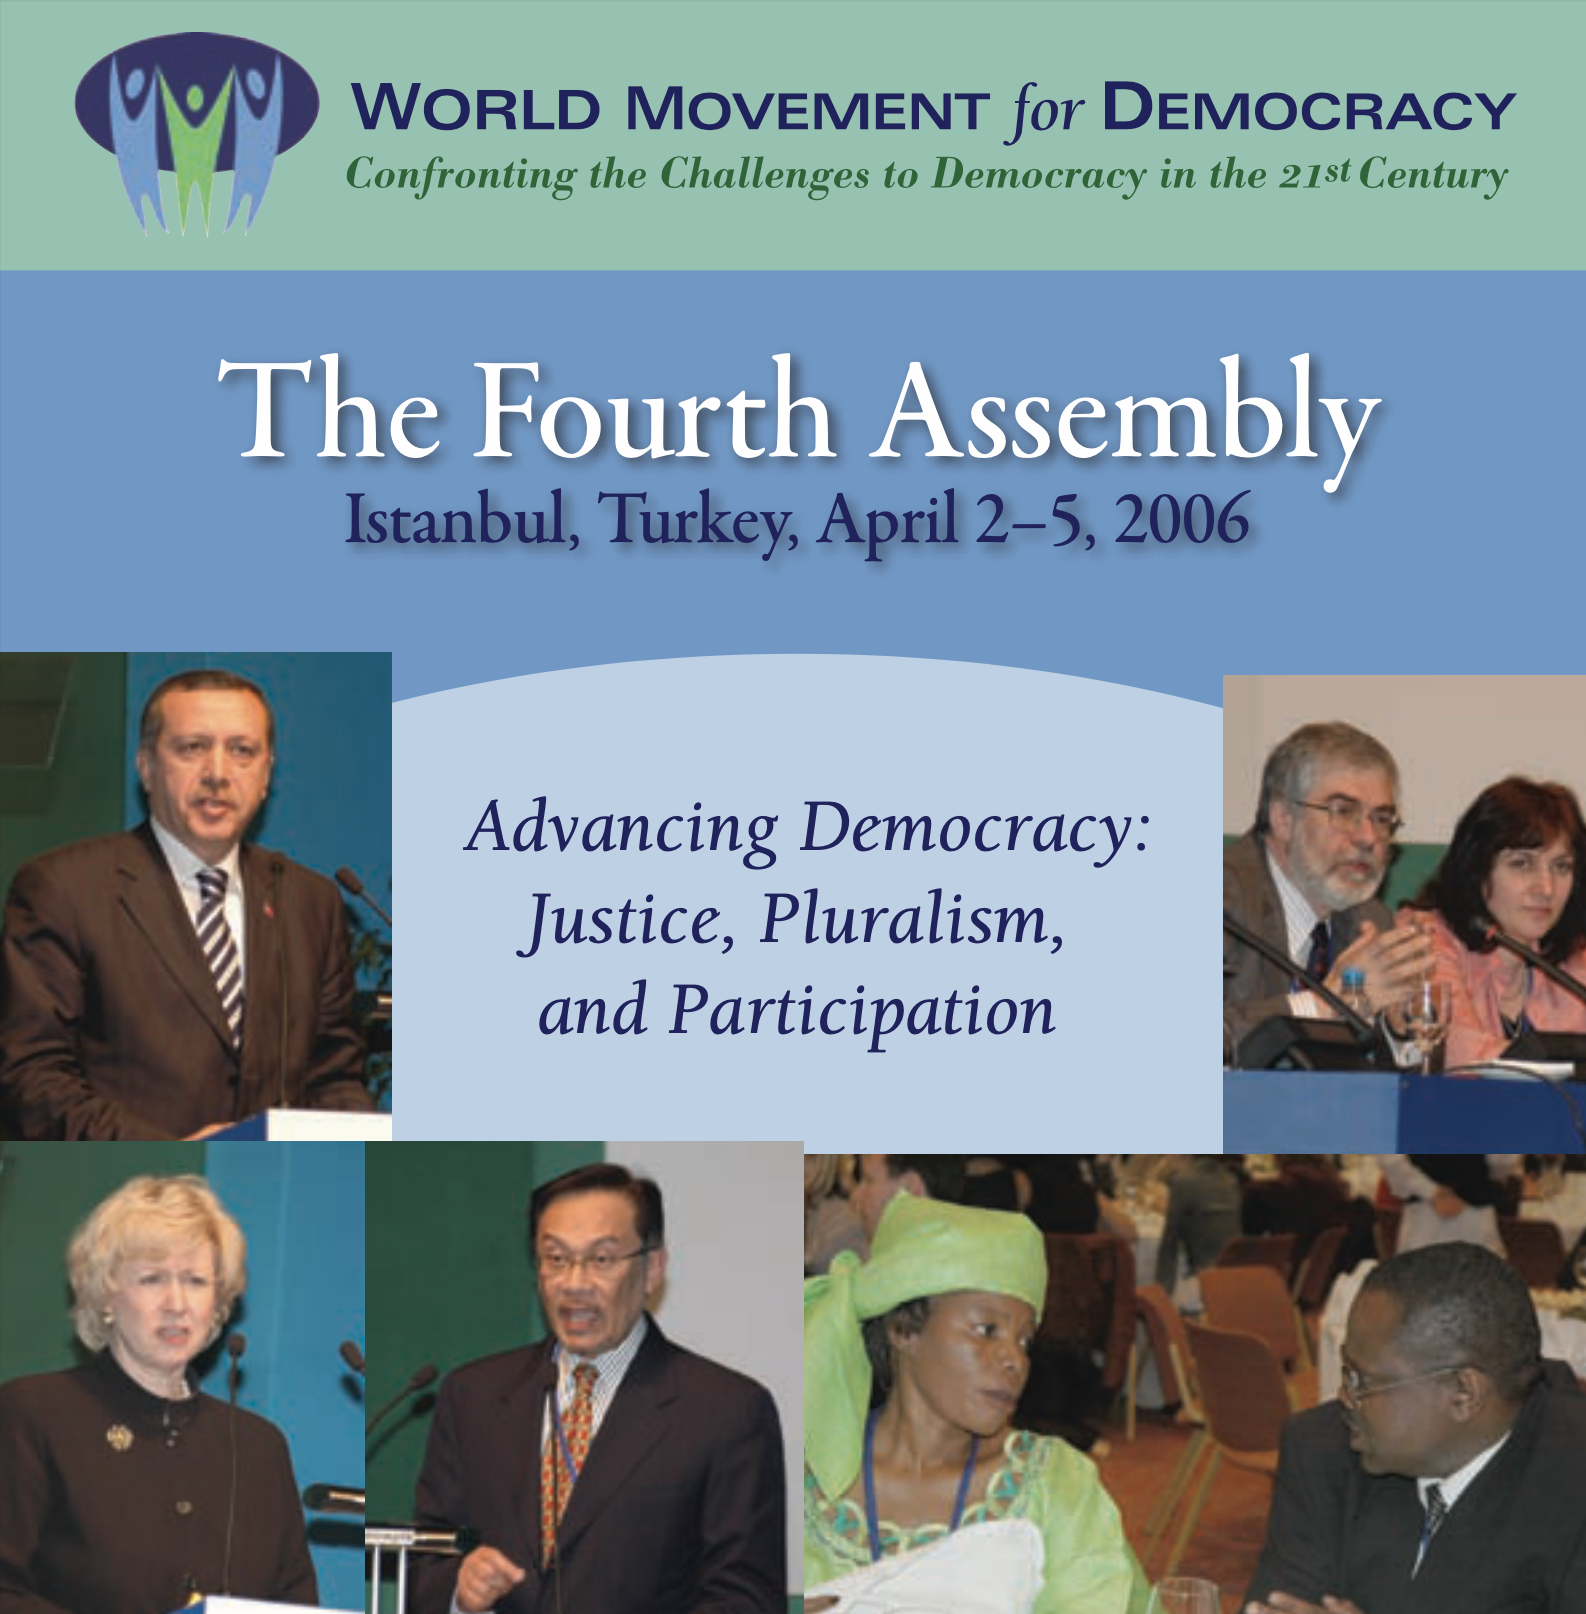 Advancing Democracy: Justice, Pluralism, and Participation